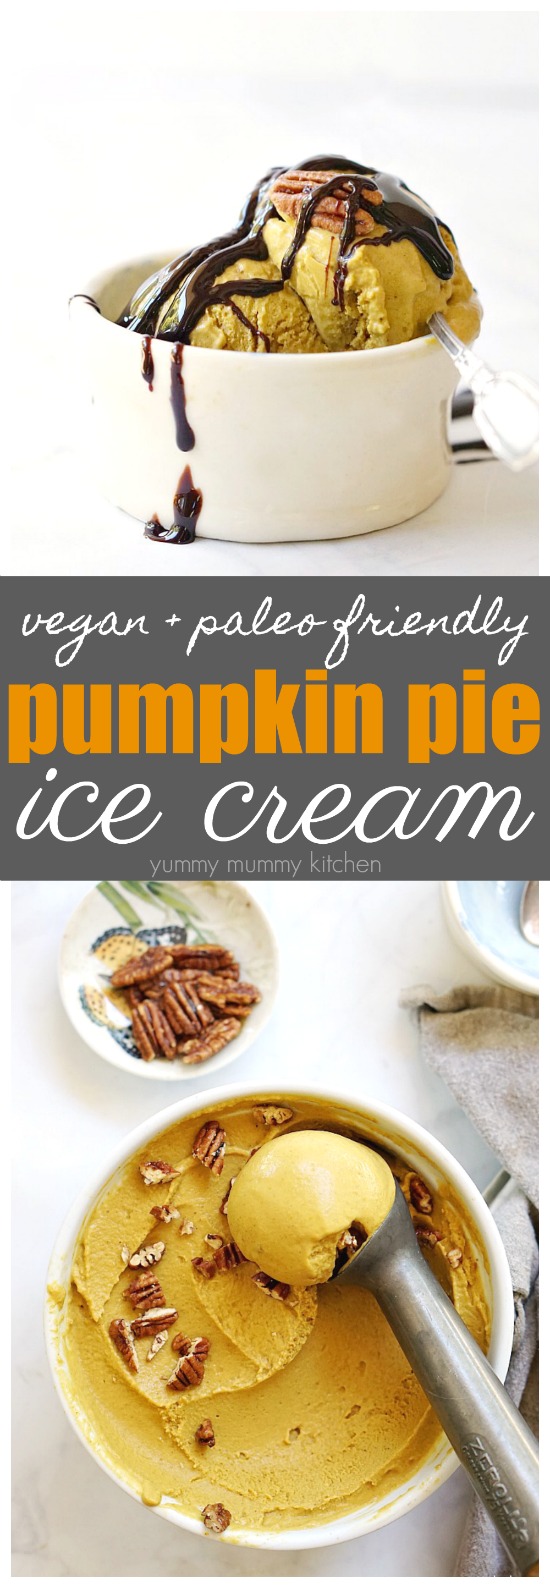 This vegan pumpkin ice cream recipe is made with coconut milk and makes a delicious fall dessert.